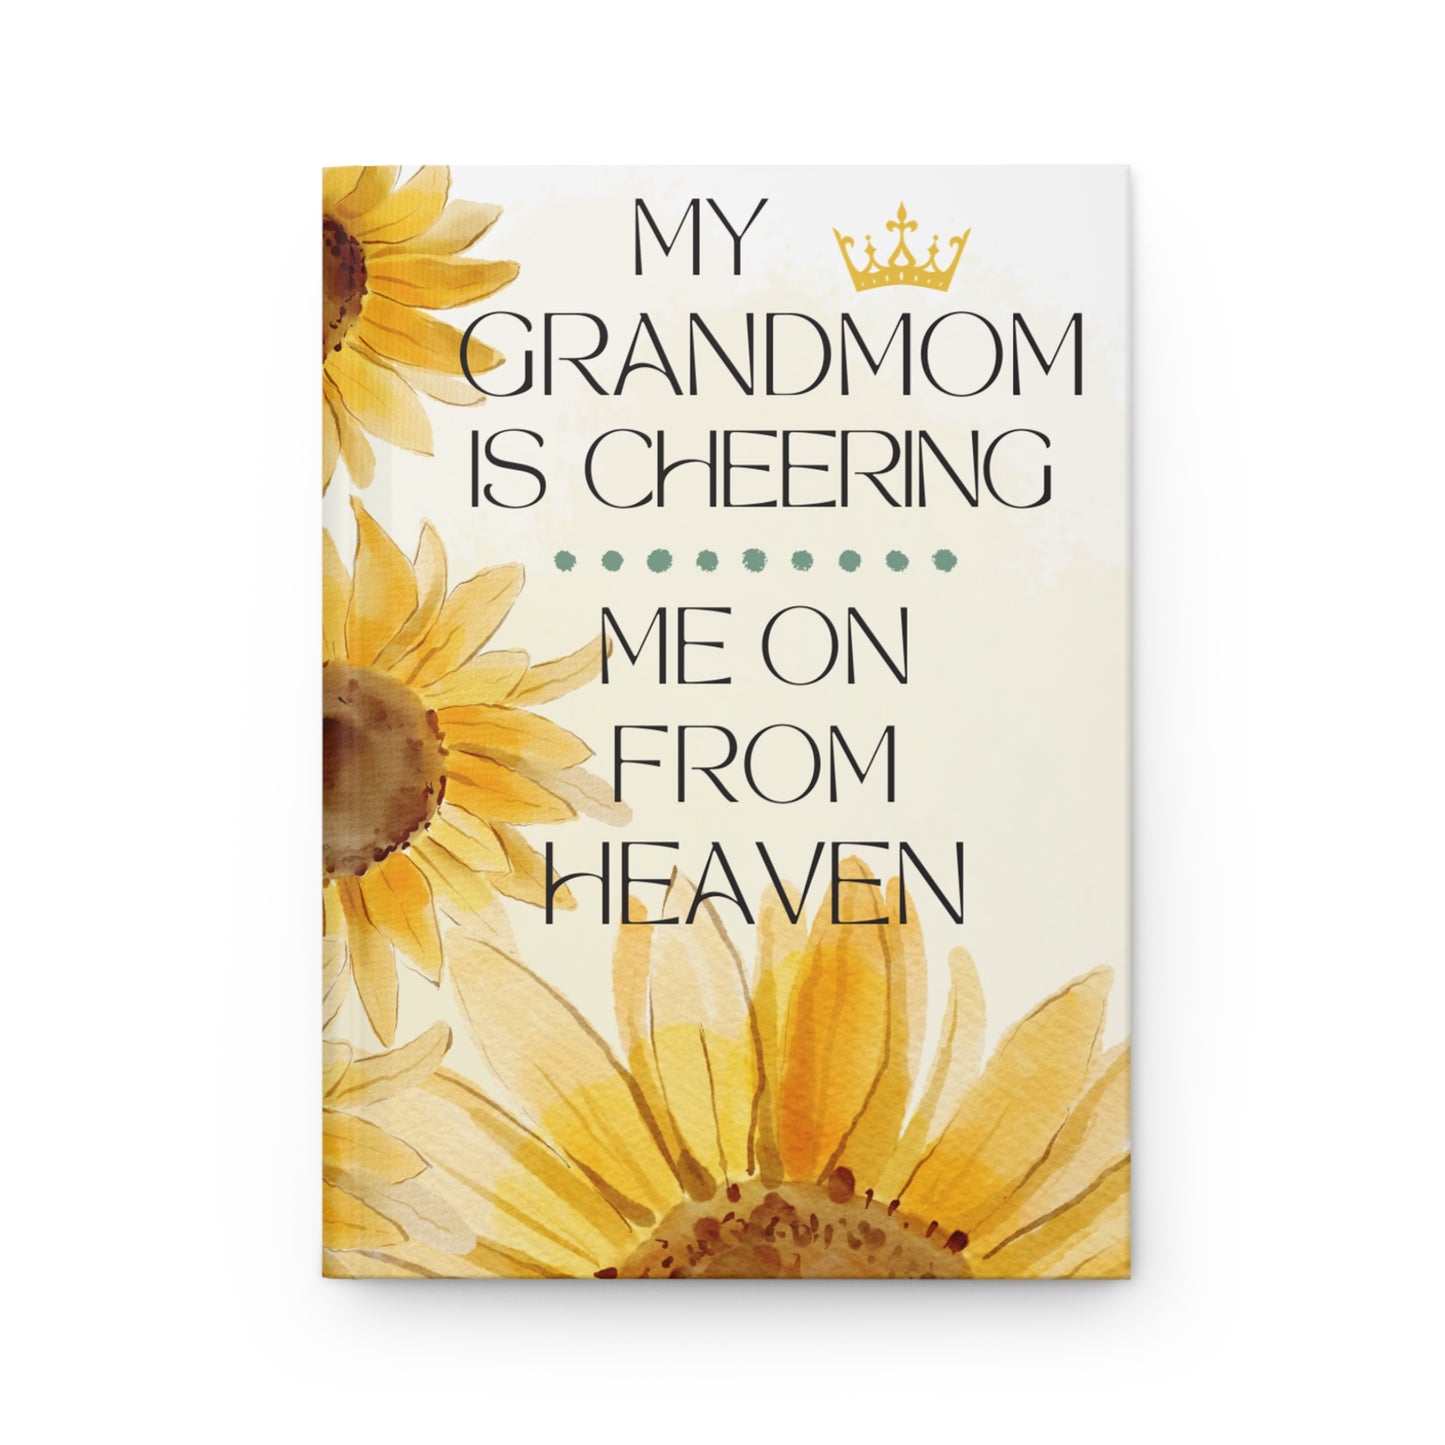 Grief Journal for Loss of Grandmom, Cheering Me On From Heaven